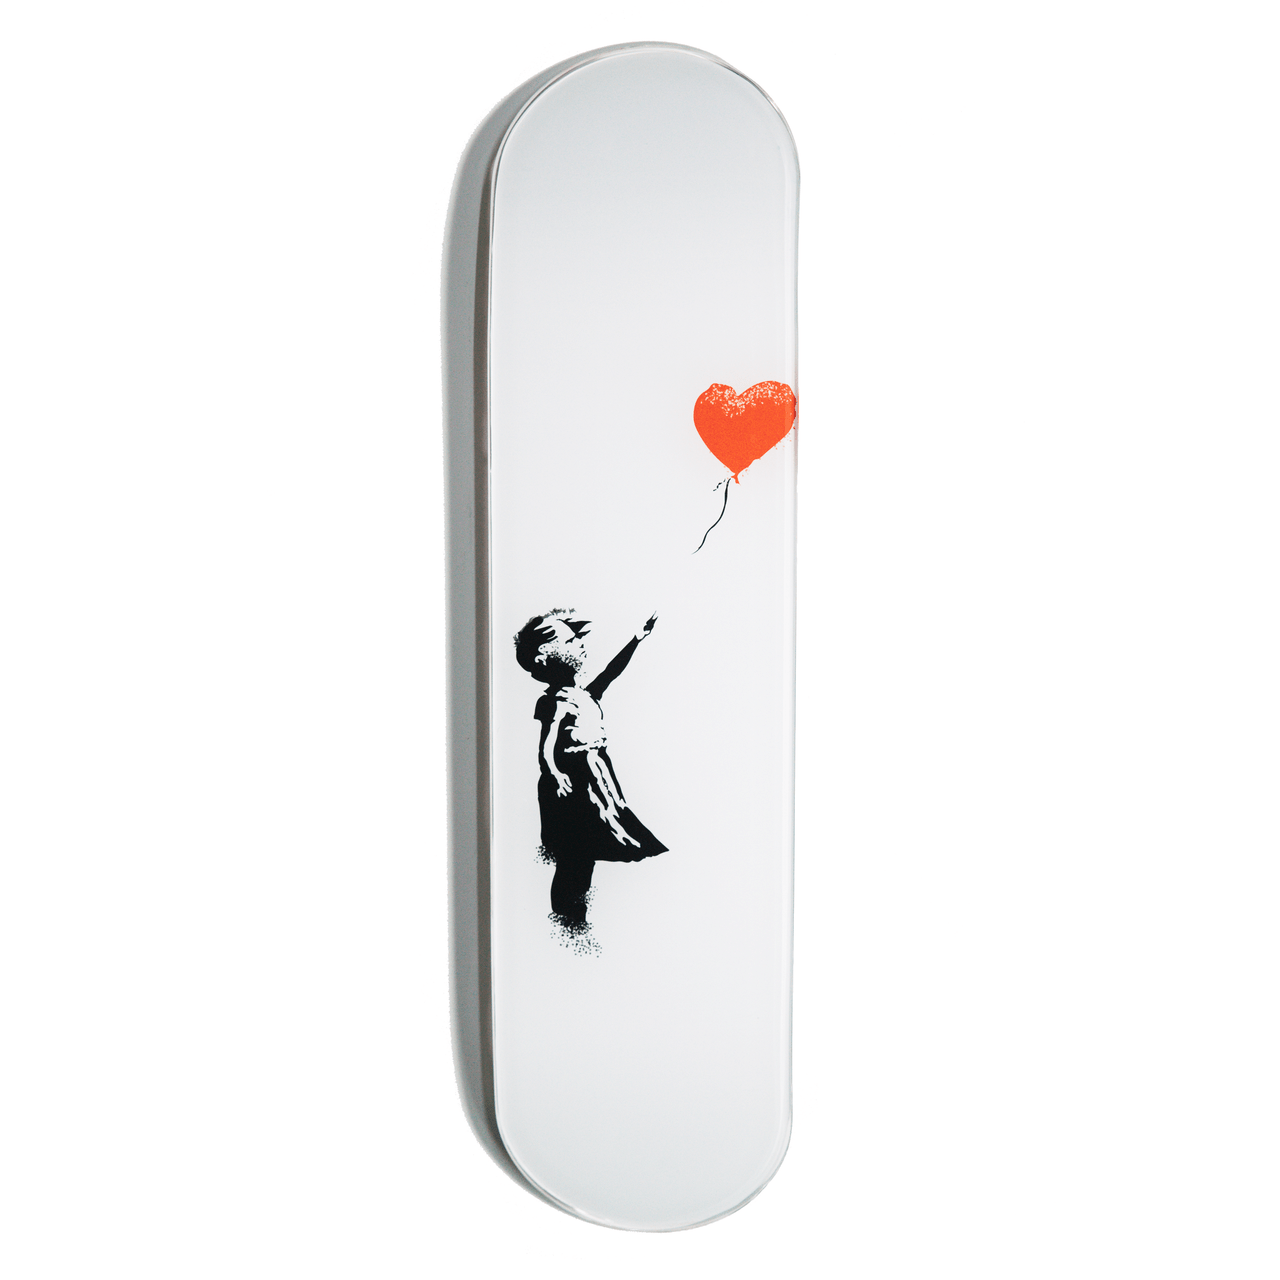 "Love" - Skateboard - The Art Lab Acrylic Glass Art - Skateboards, Surfboards & Glass Prints Wall Decor for your Home.